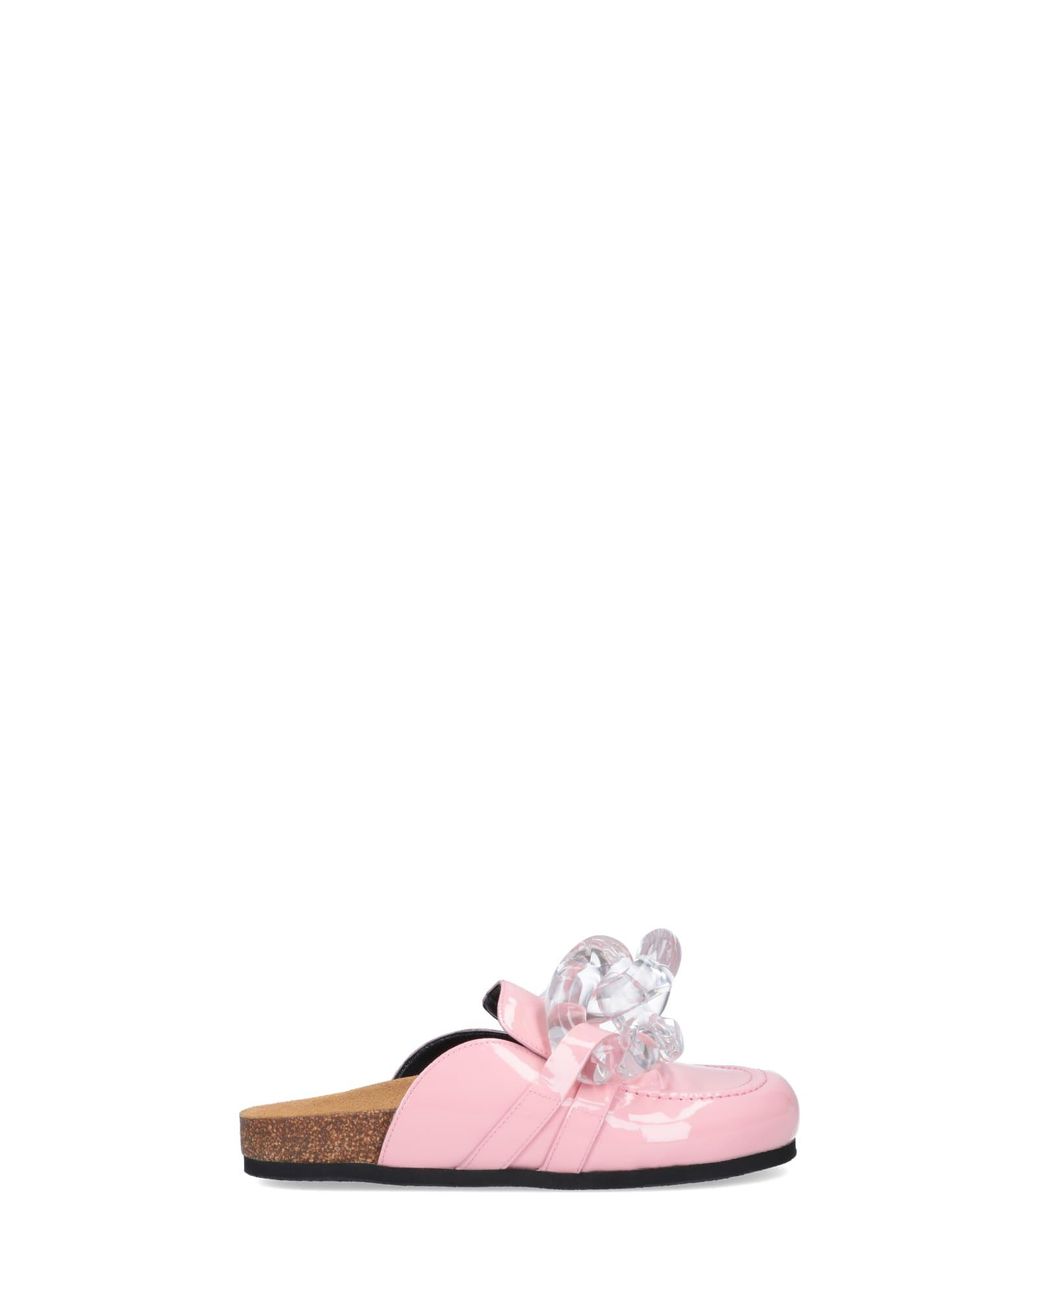 Womens Shoes Flats and flat shoes Flat sandals JW Anderson Womens Sandals in Pink Save 37% 